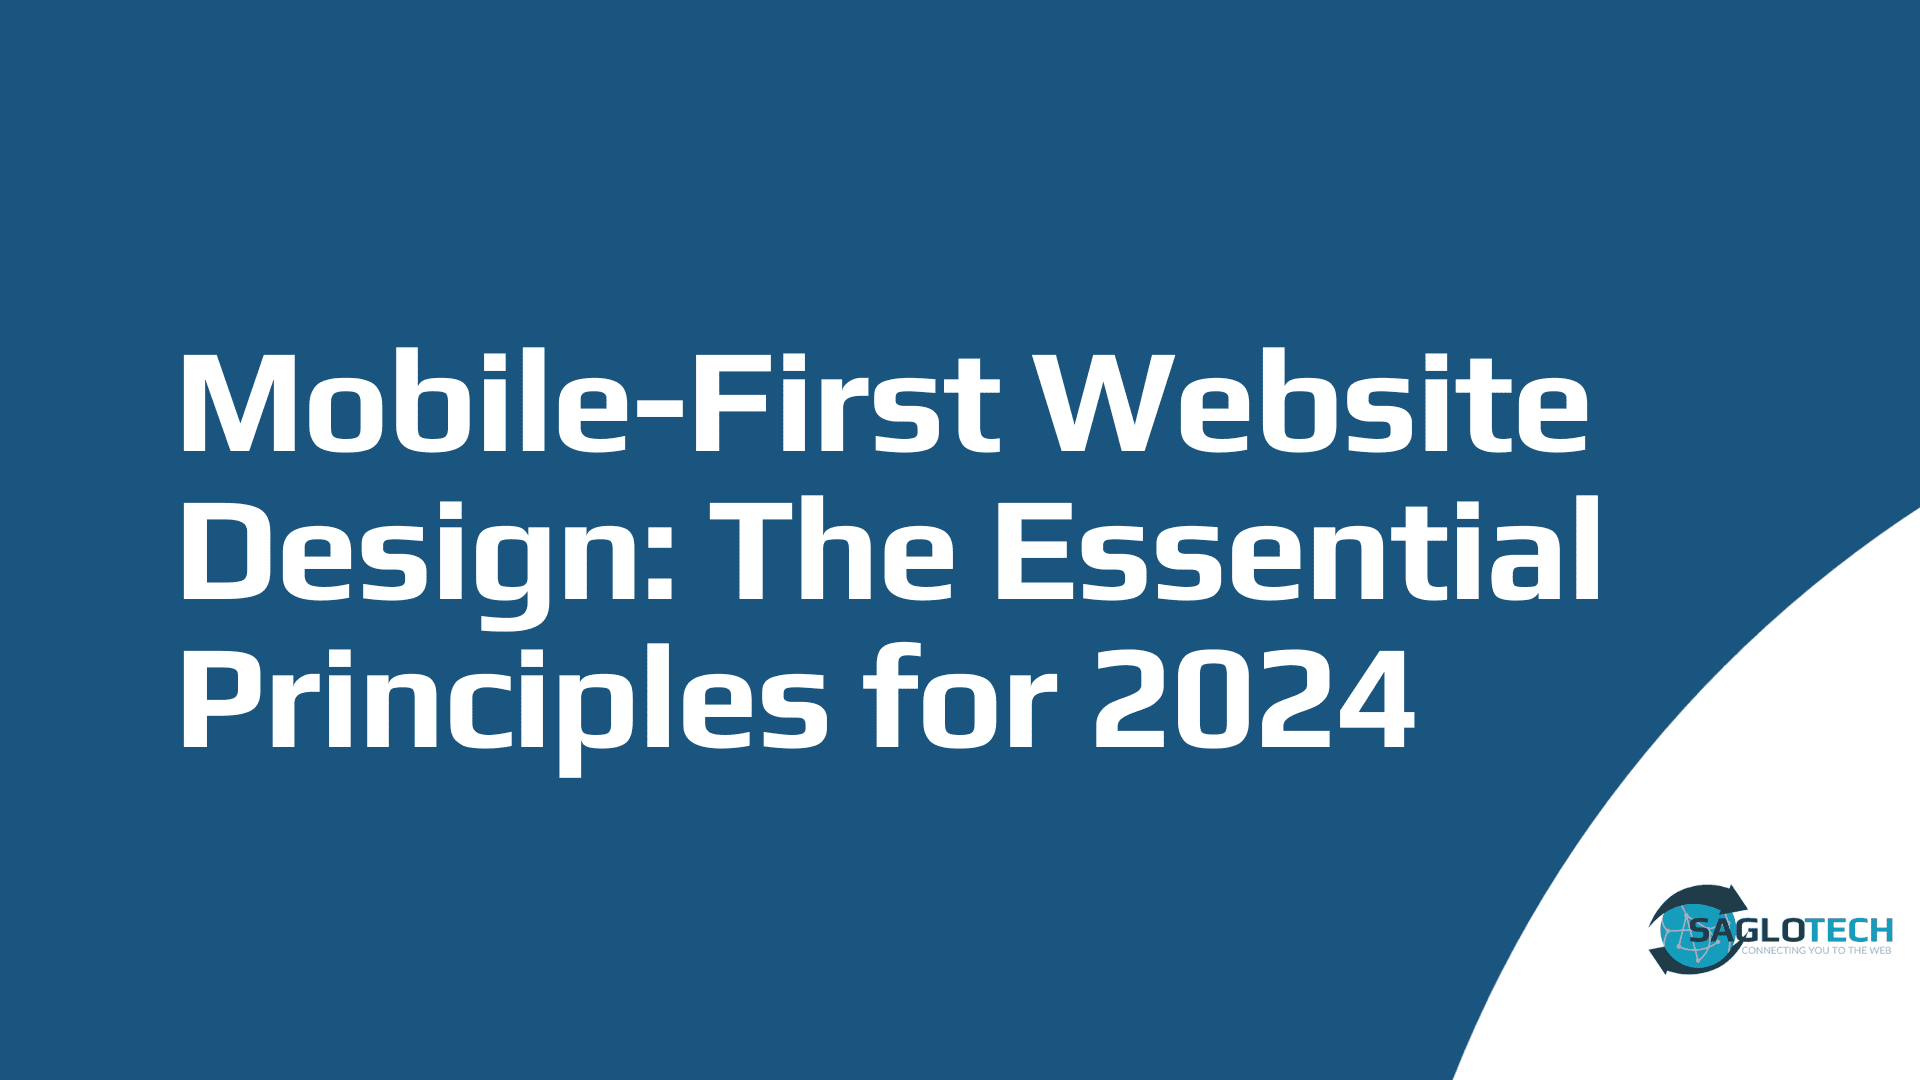 Mobile-First Website Design: The Essential Principles for 2024